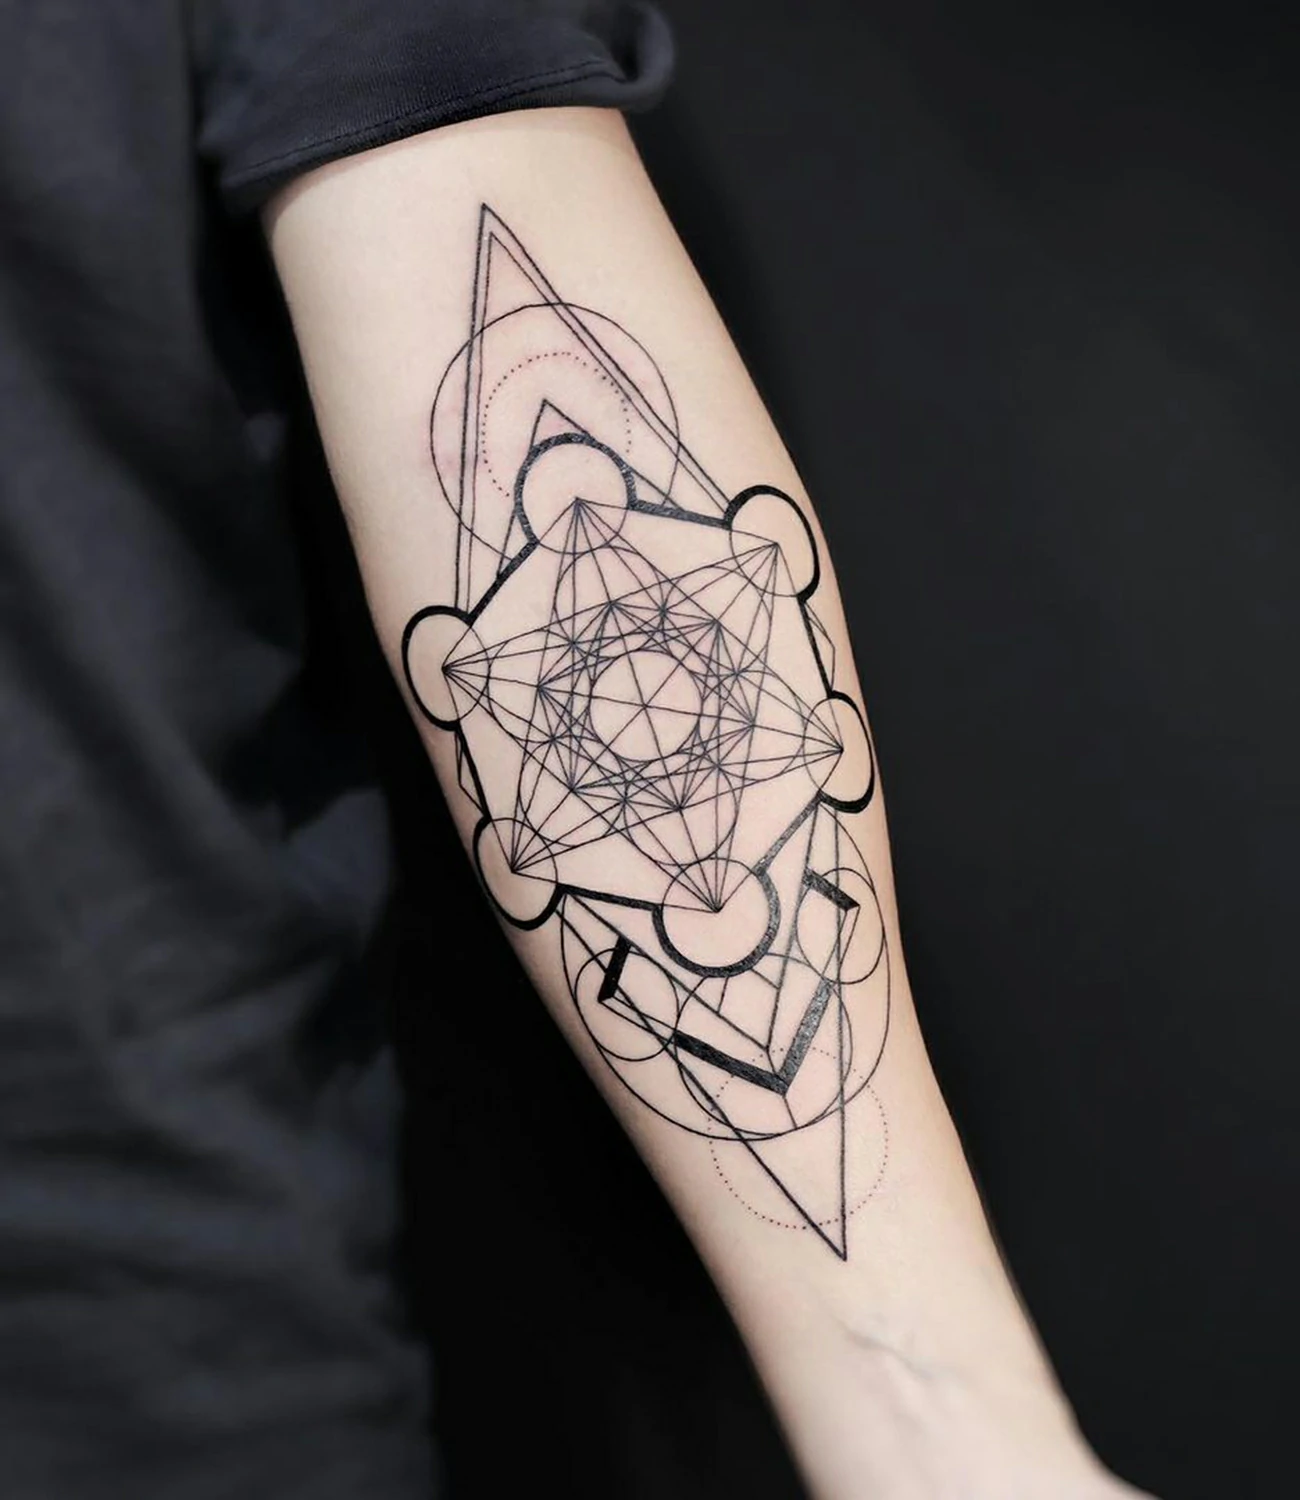 Geometric Shapes Tattoo: Geometric shapes tattoos feature arrangements of basic shapes like triangles, circles, and squares, symbolizing clarity and balance.